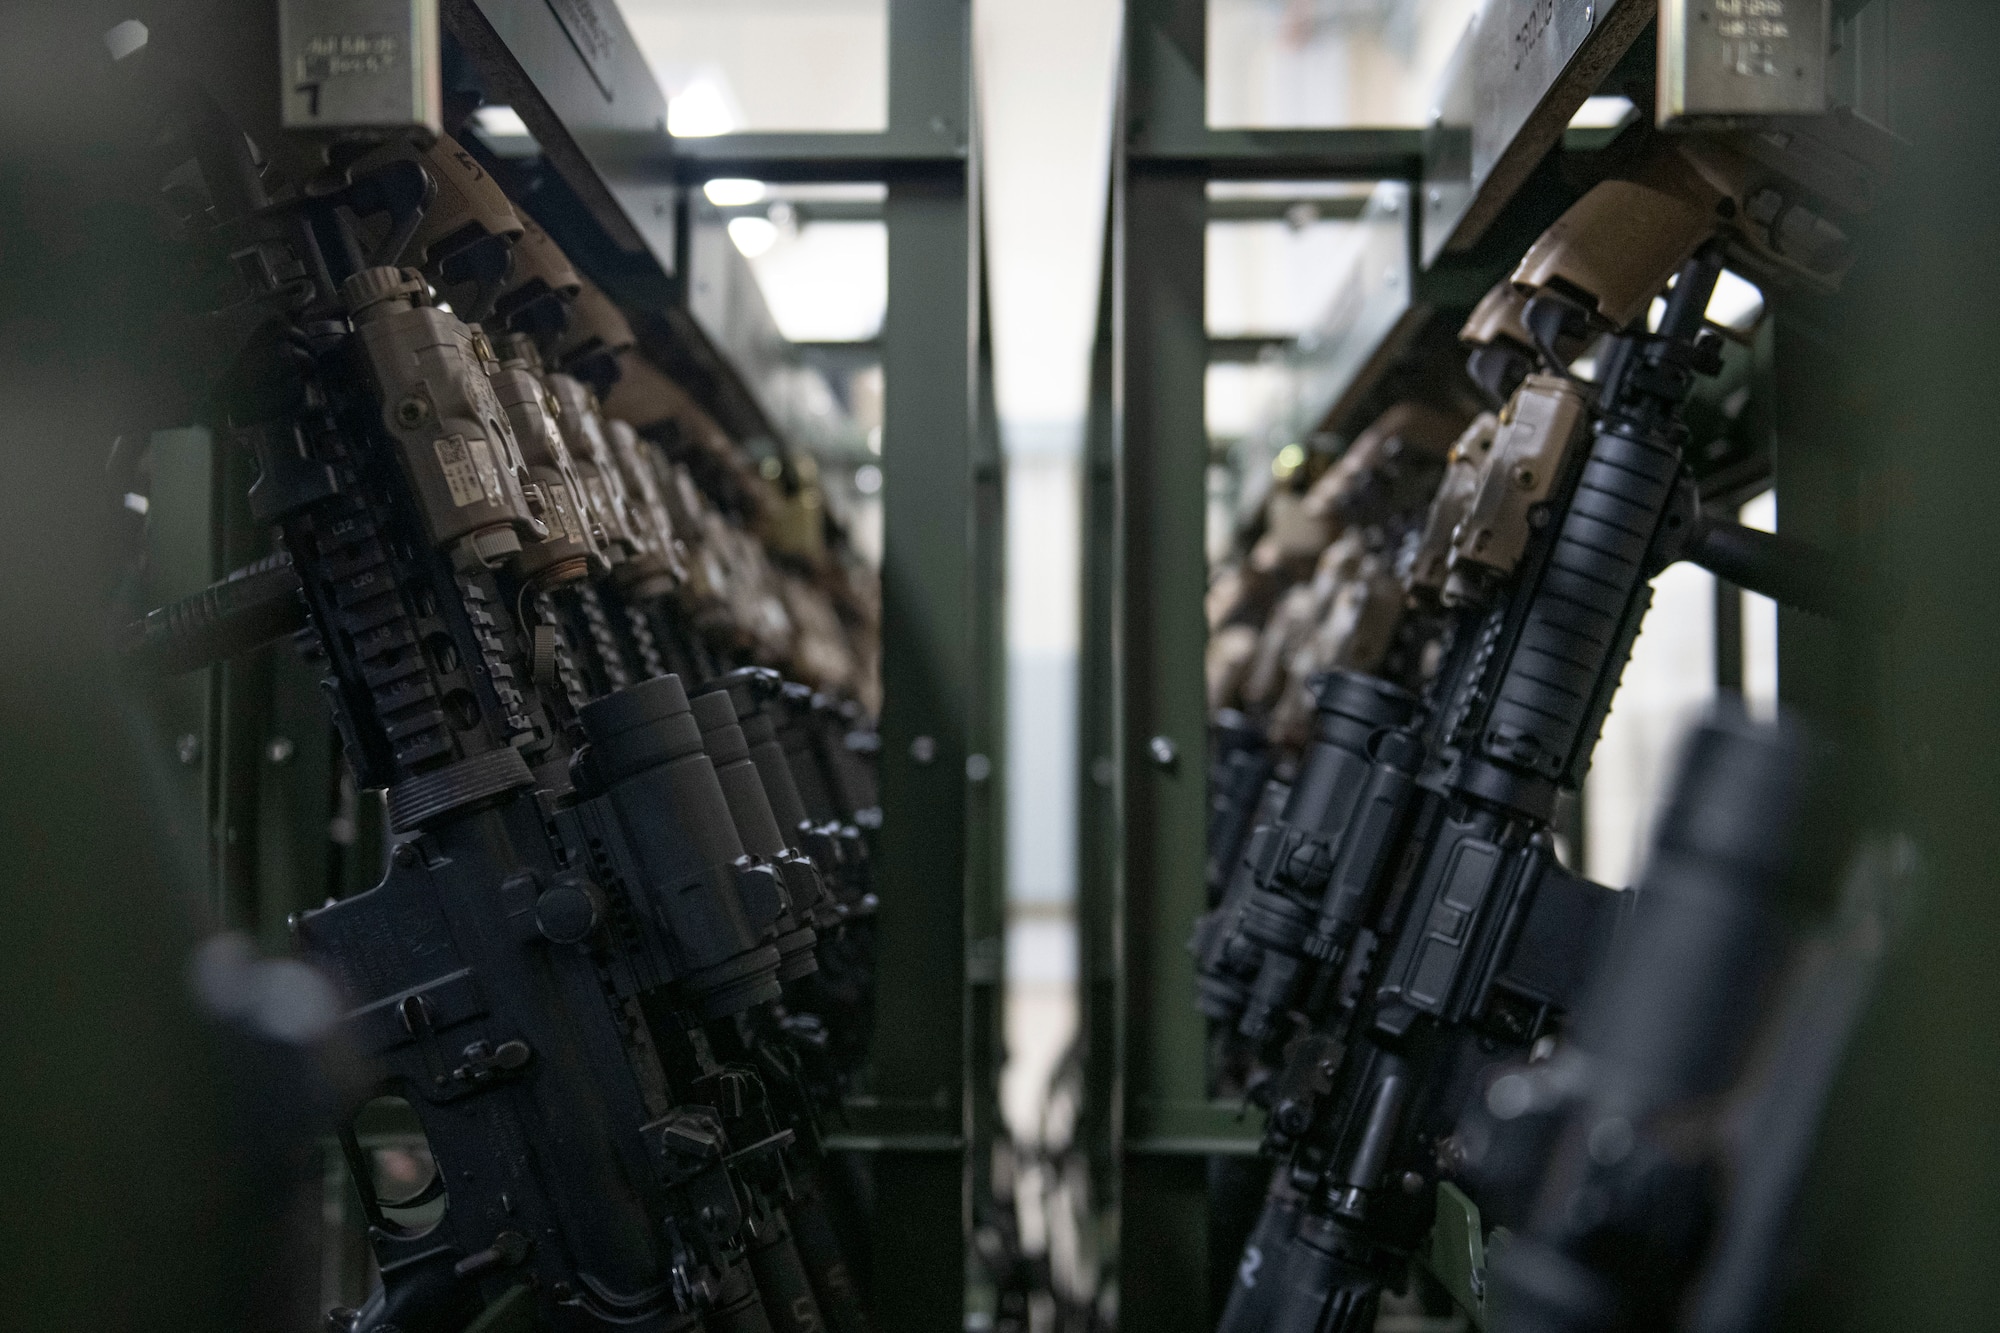 Weapons sit in their racks at RAF Croughton, England, April 6, 2022. The armory was the first in the entire Air Force to fully integrate a radio-frequency identification tracking system. (U.S. Air Force photo by Senior Airman Jason W. Cochran)